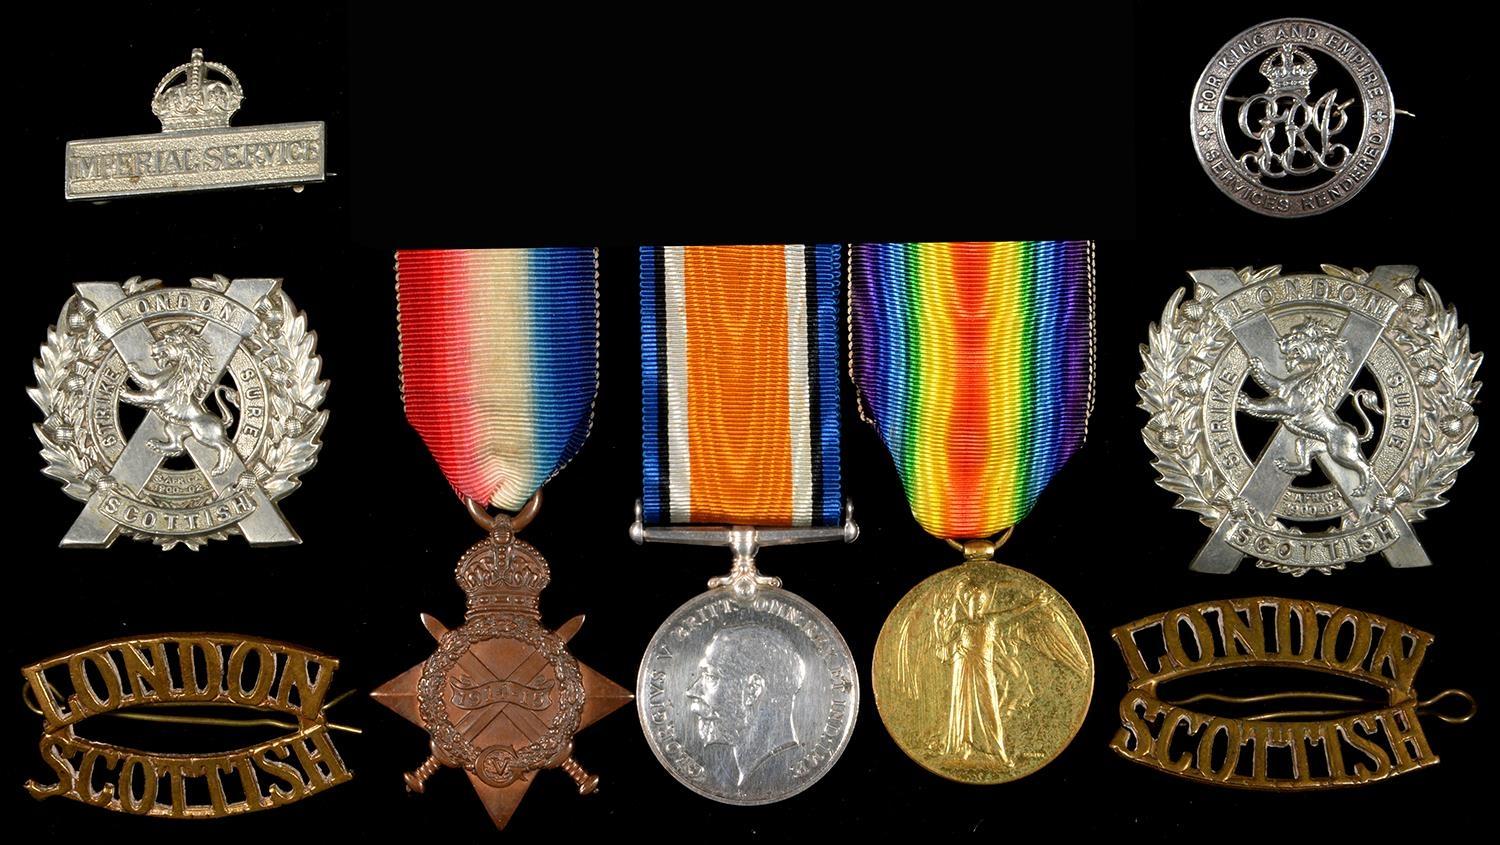 WWI GROUP OF THREE, 1914-15 STAR, BRITISH WAR MEDAL AND VICTORY MEDAL 3527 PTE T C KLEIN 14 LOND